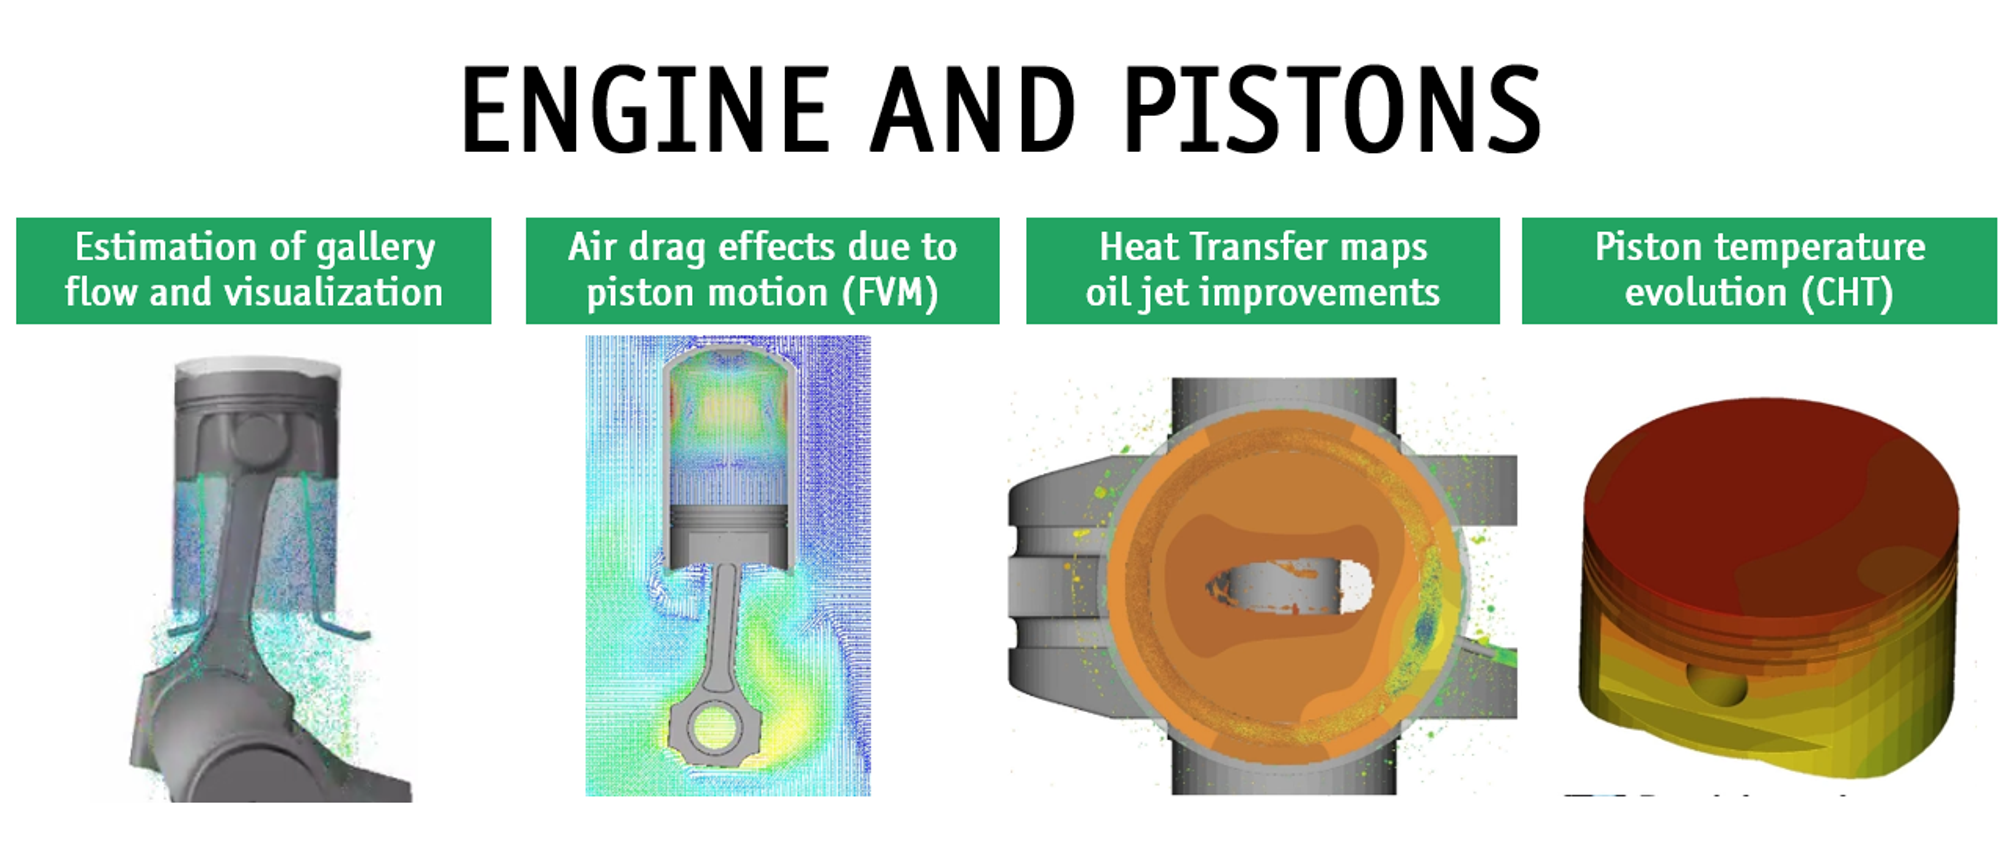 ENGINES AND PISTONS